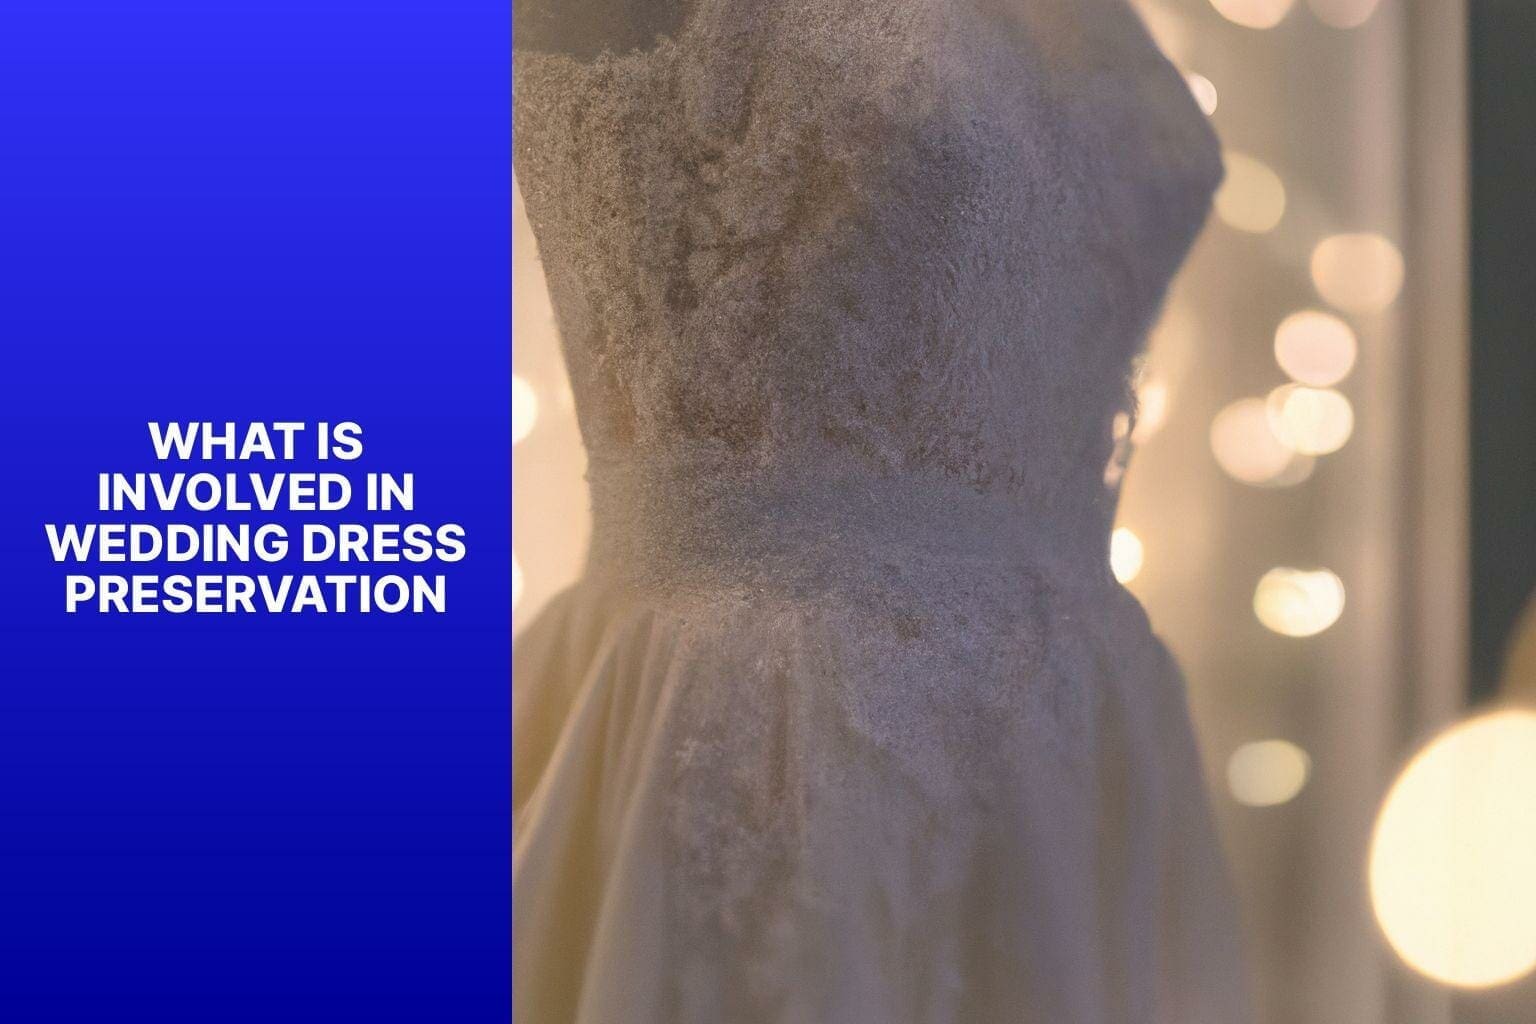 What is involved in wedding dress alterations and preservation?